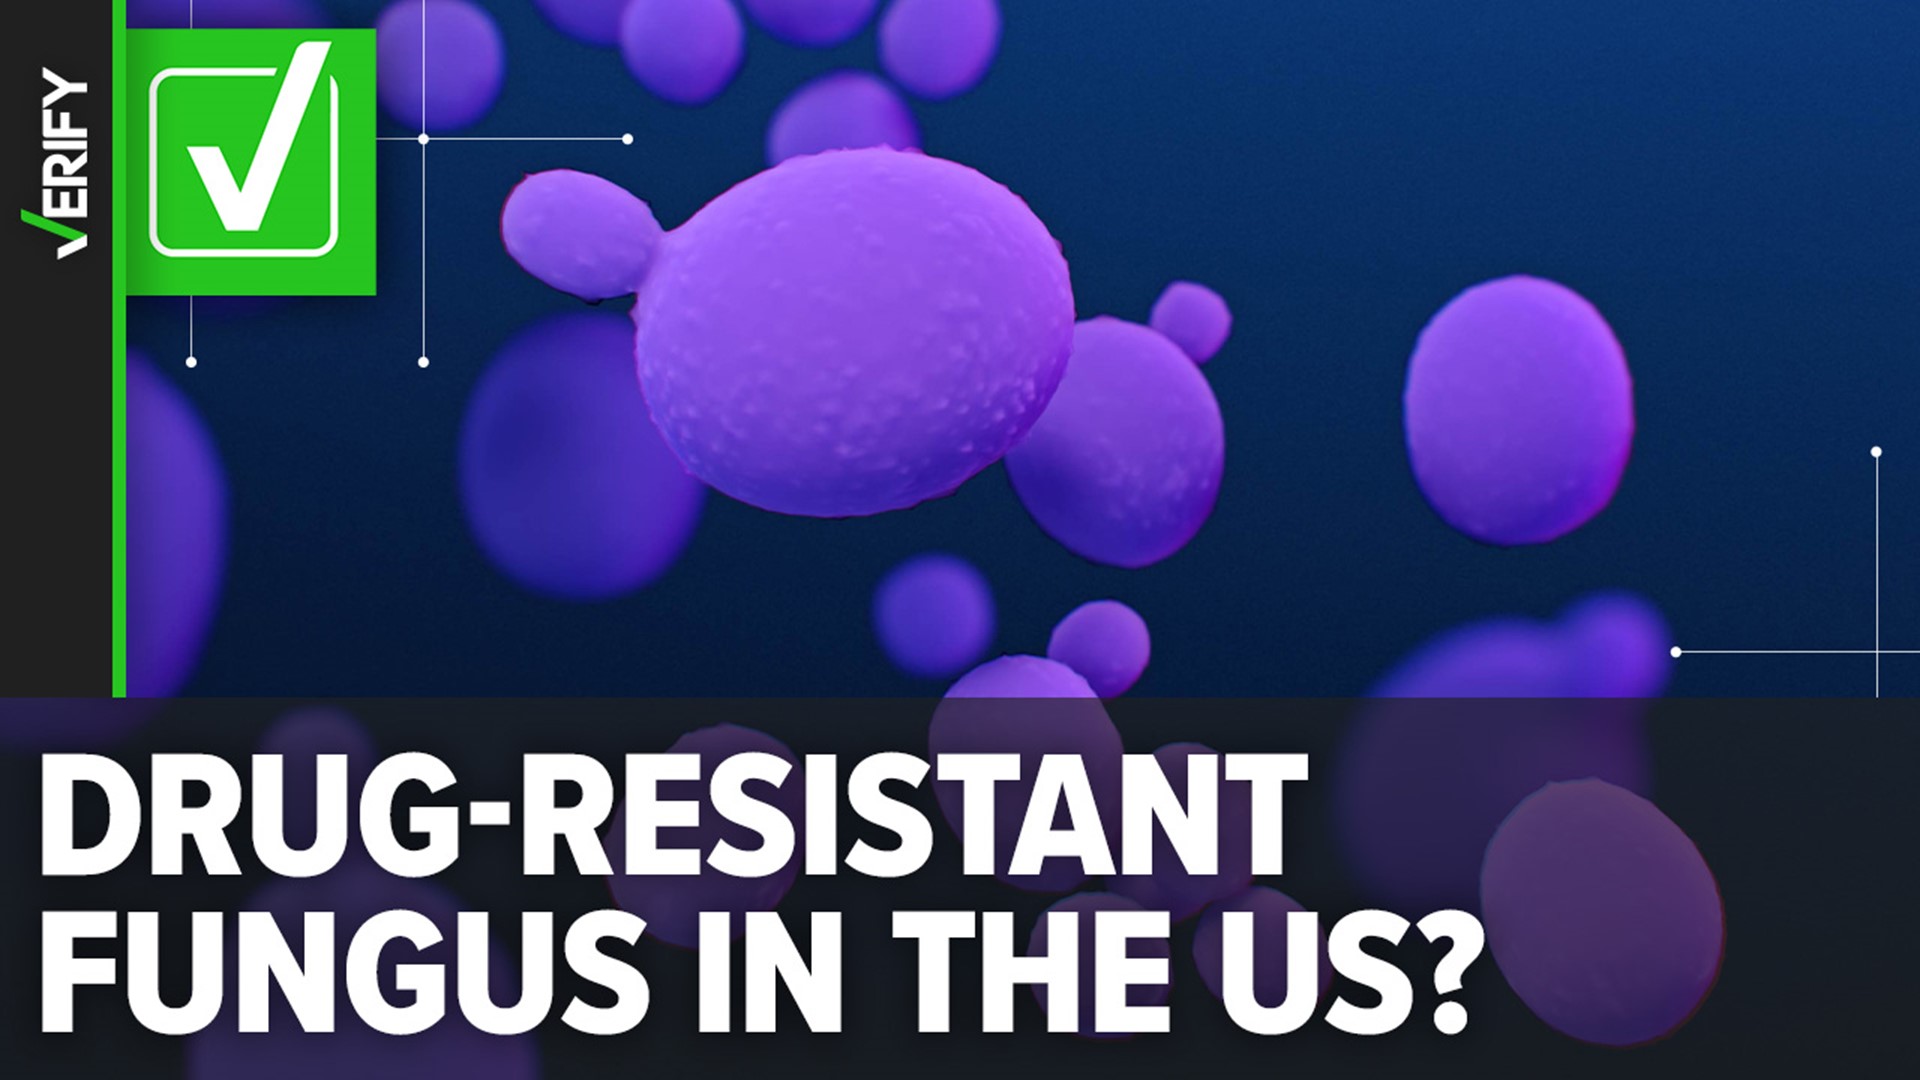 Candida auris is generally not a threat to healthy people, but it poses a danger to people with weakened immune systems. It was first reported in the U.S. in 2016.